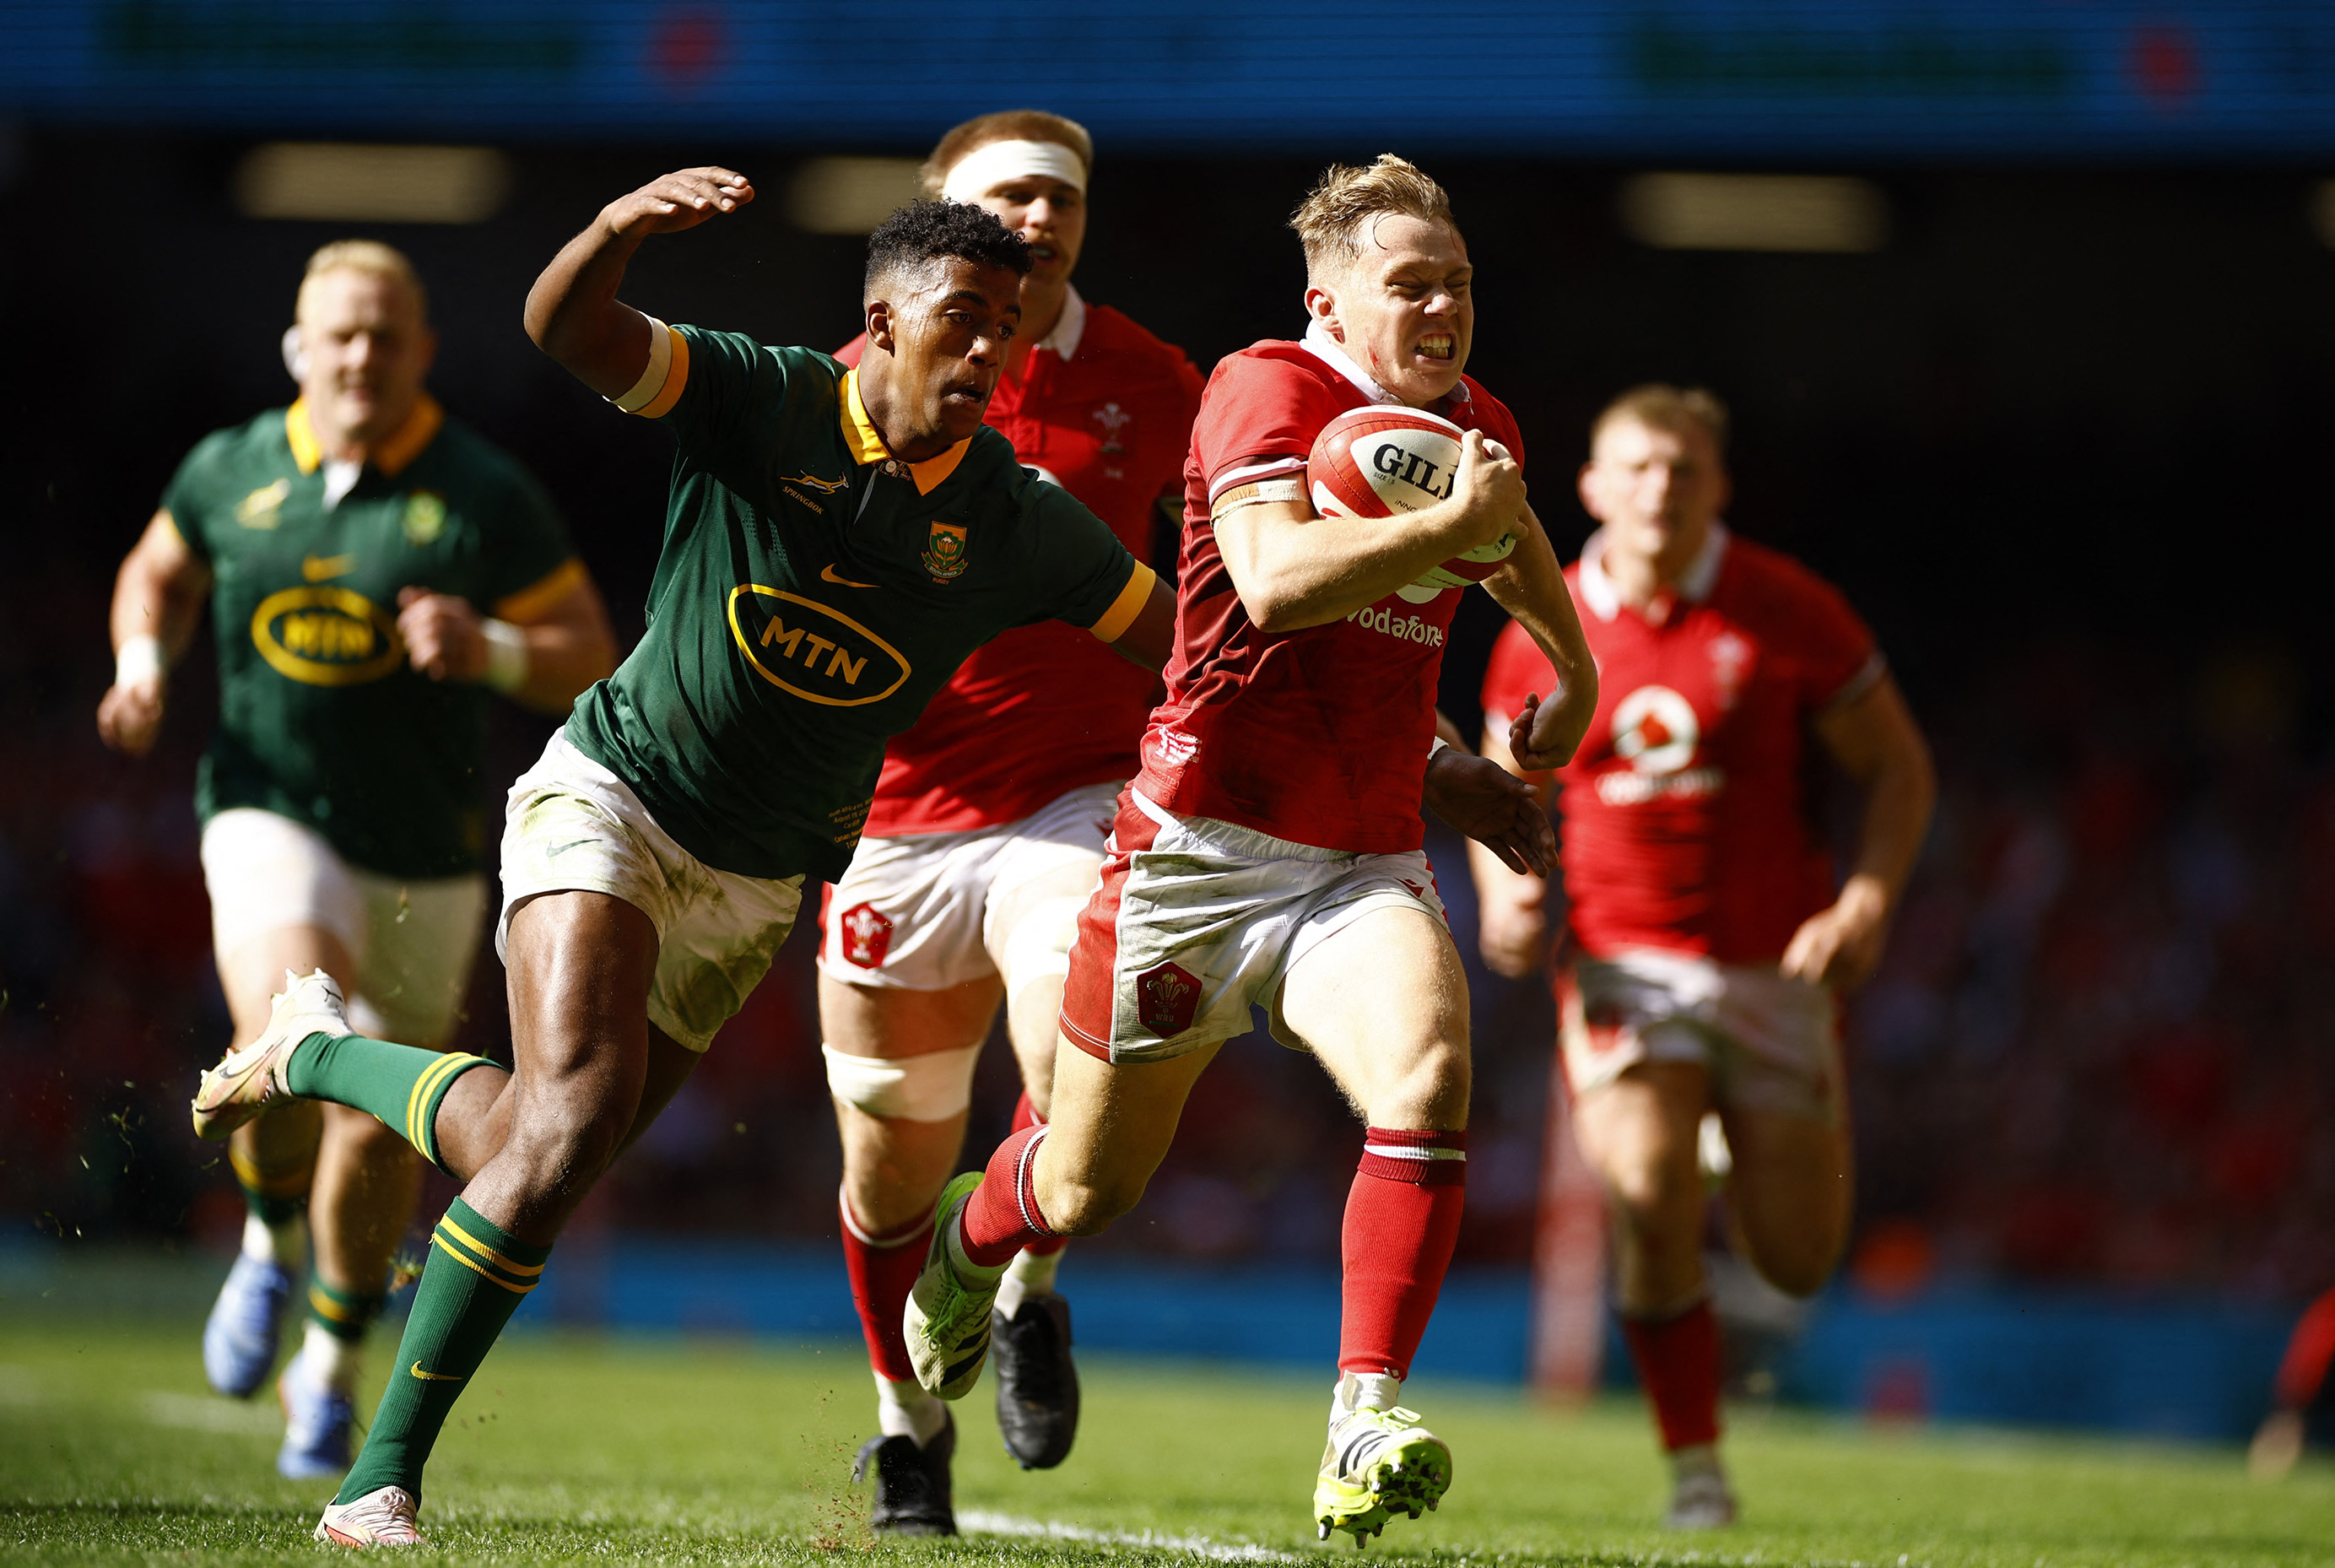 Superb South Africa put Wales to the sword with 52-16 win Reuters